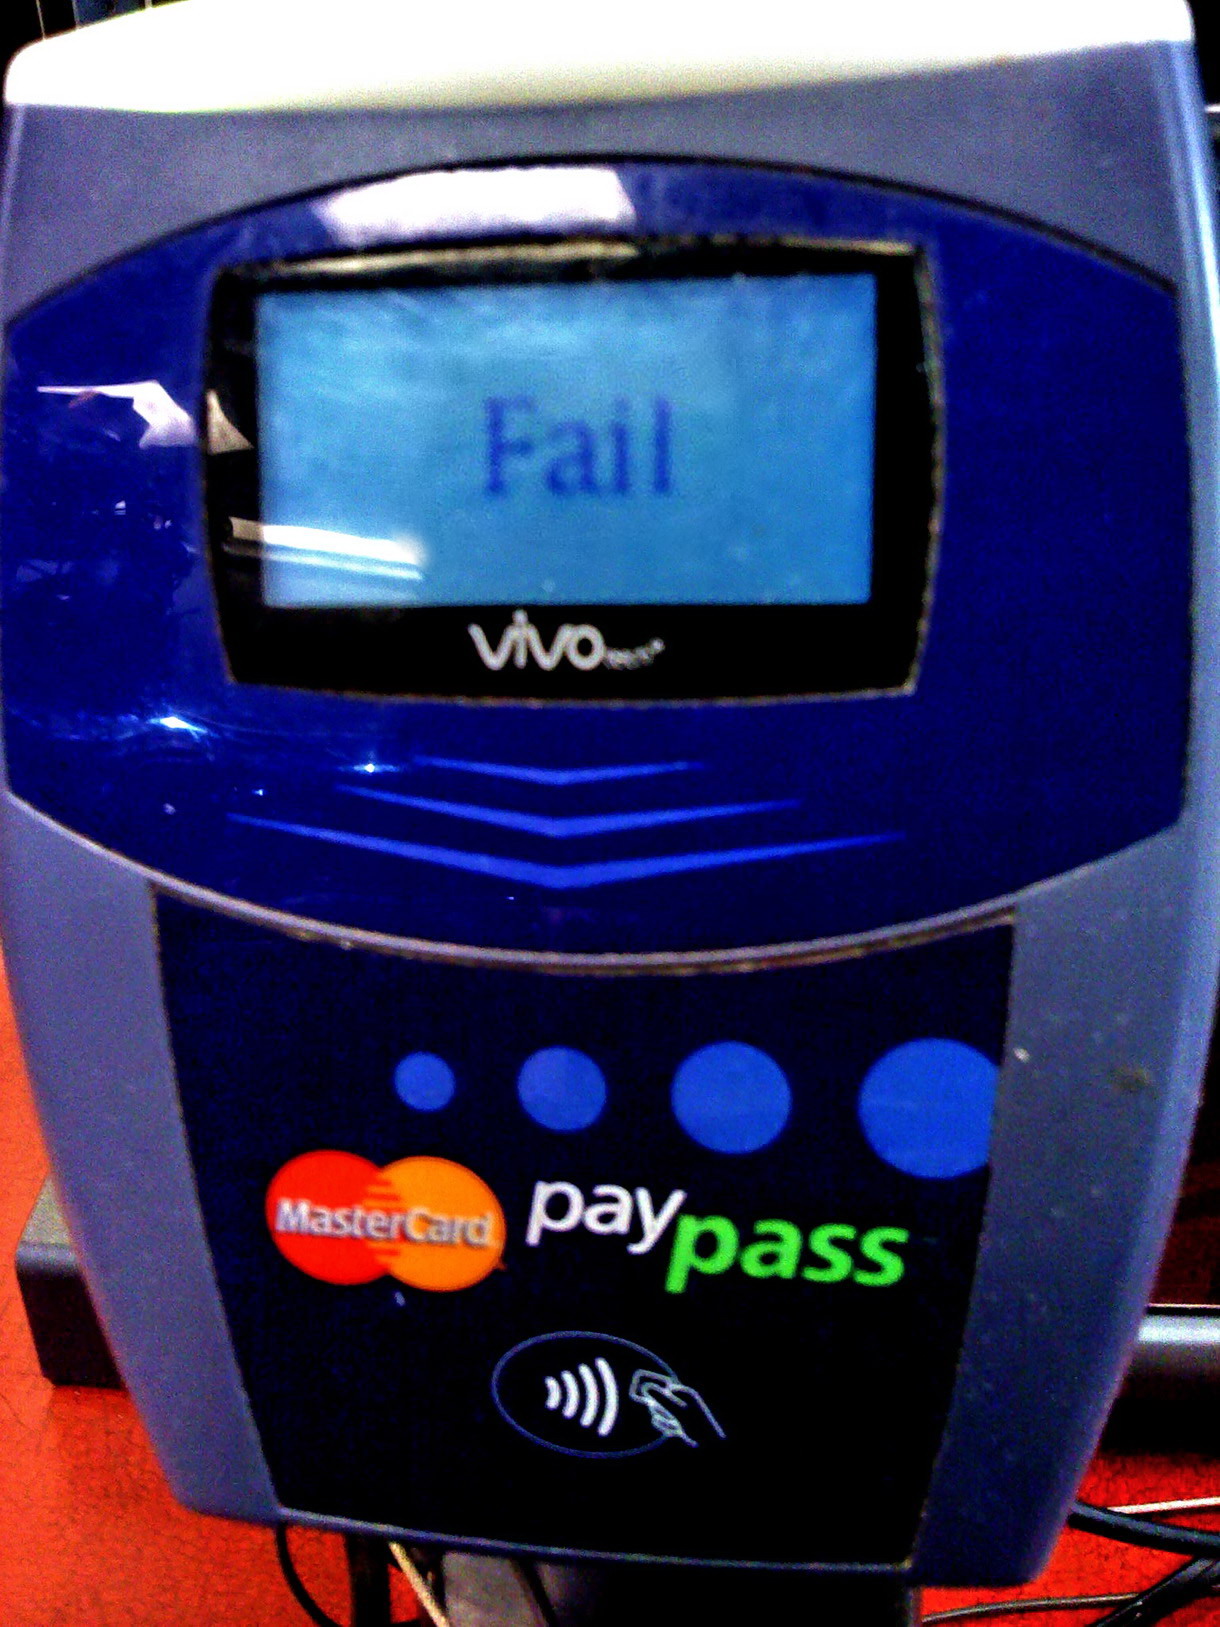 Even the Pay Pass Machine needs to let you know how you're doing in life...